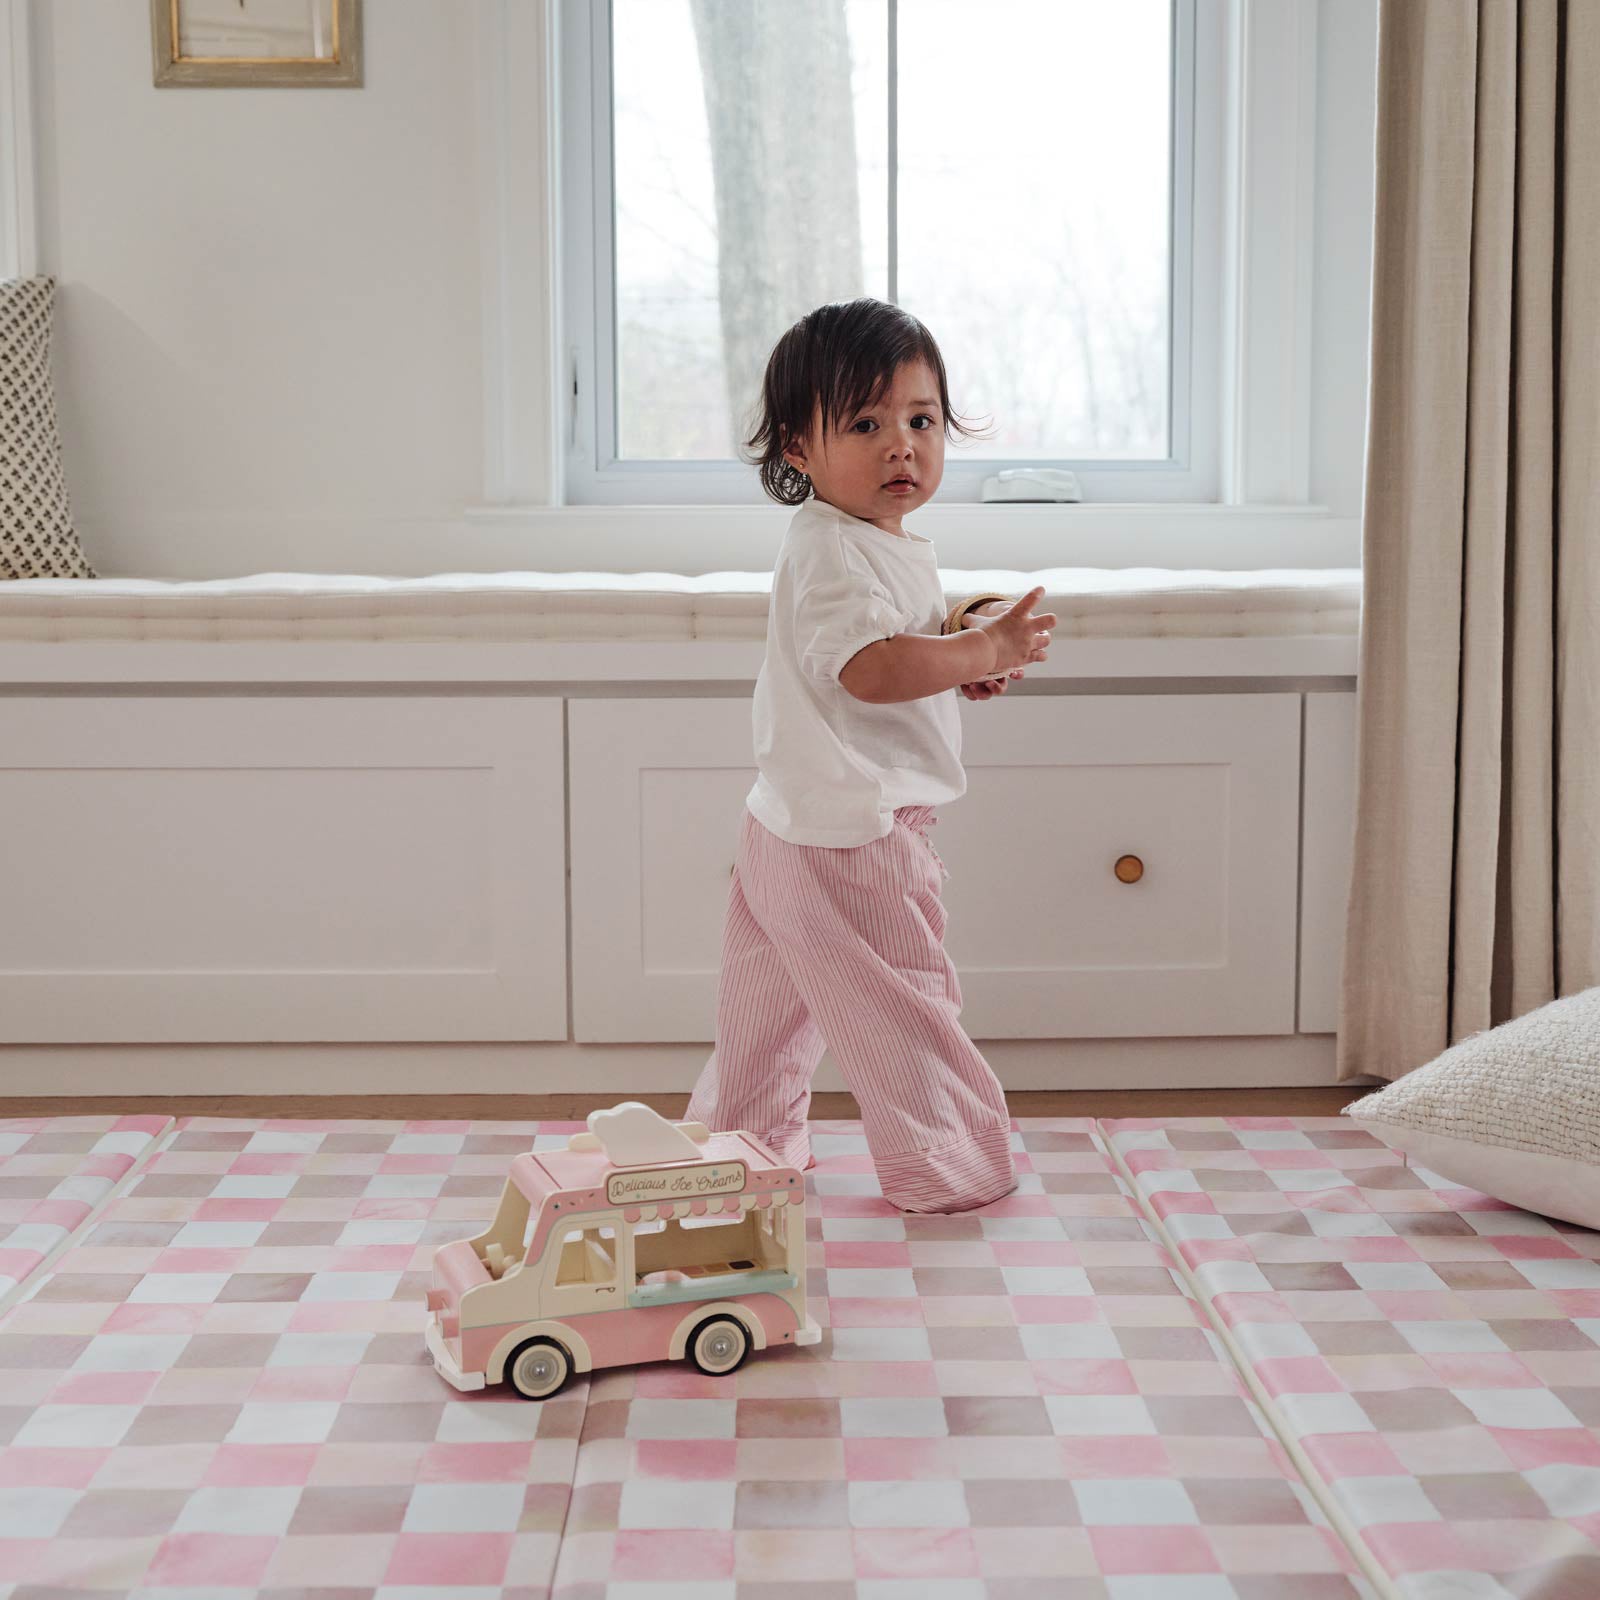 Toddler girl standing on the pink and brown gingham print tumbling mat holding an ice cream toy